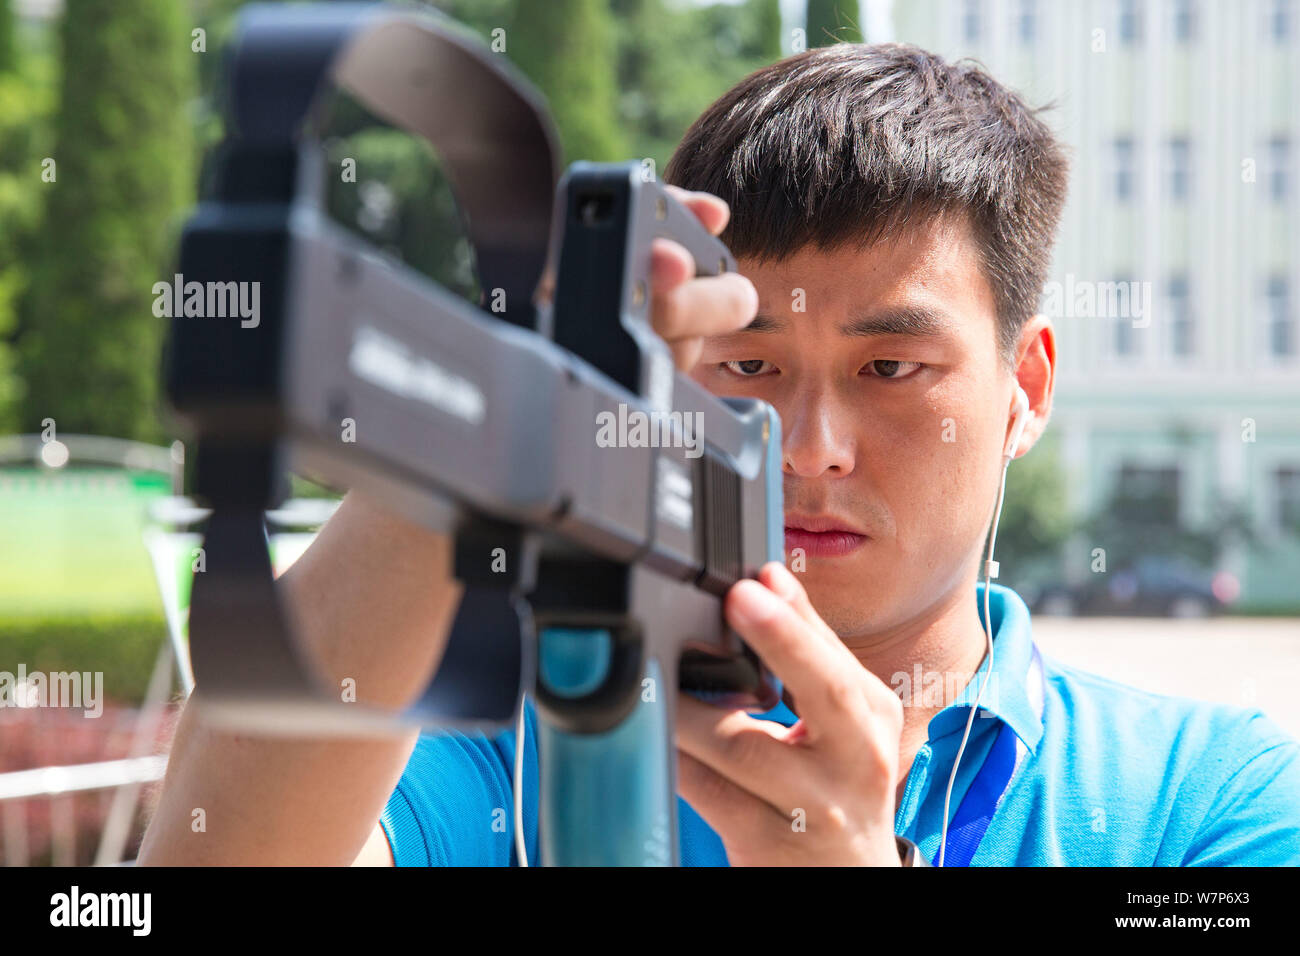 A Chinese inspector uses an anti-cheating device to monitor radio signal during the 2017 National College Entrance Exam, also known as gaokao, at a sc Stock Photo